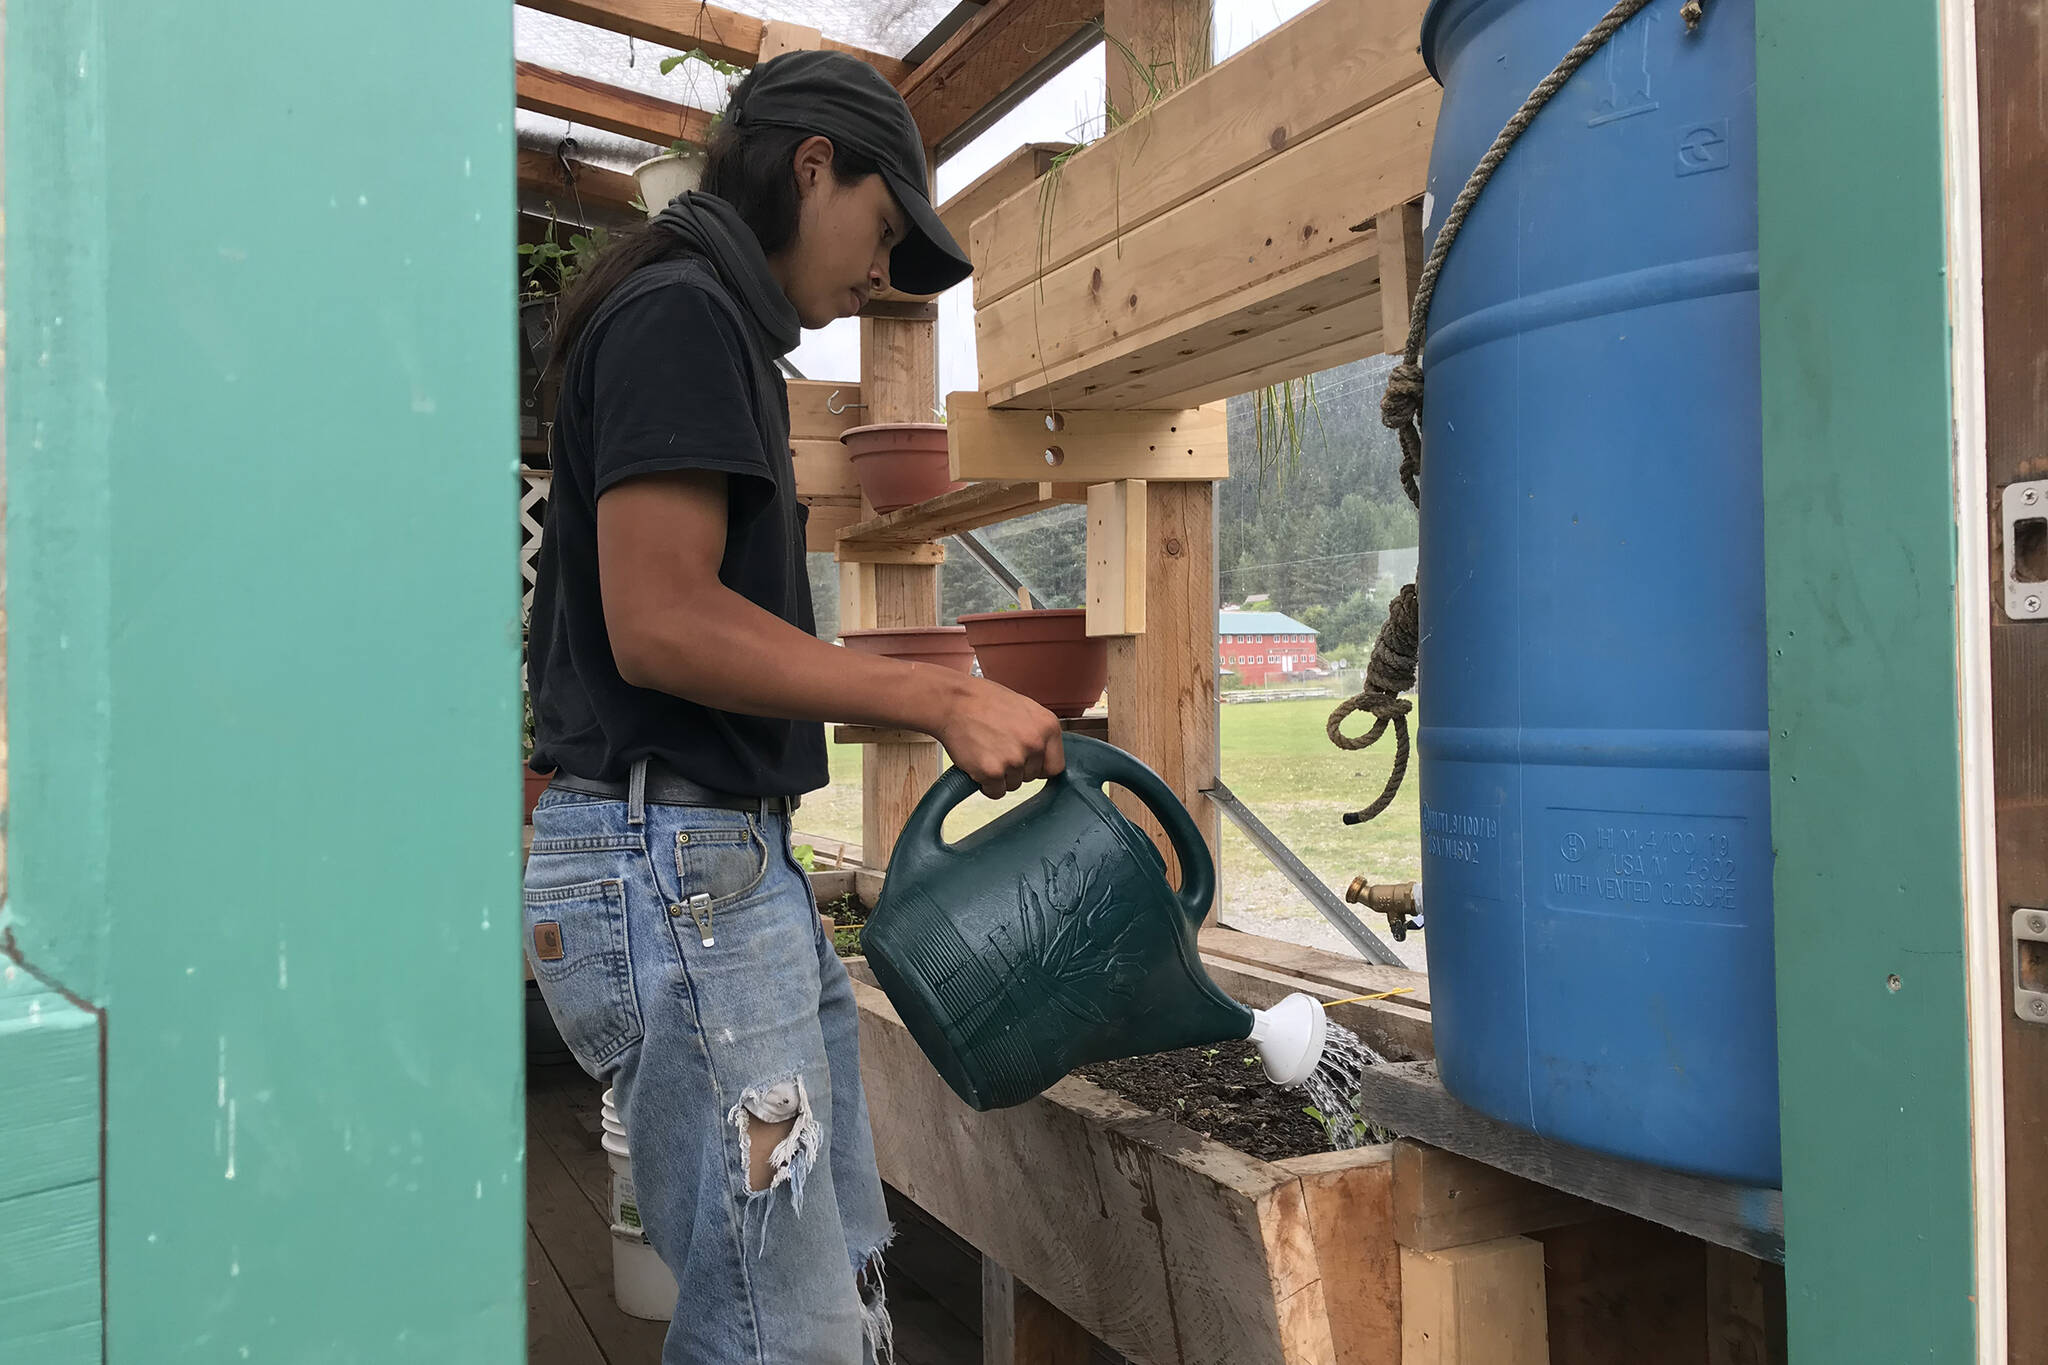 Hoonah’s Alaska Youth Stewards helped make improvements to Moby and water the plants in summer 2021. (Courtesy Photo / Jillian Schuyler)